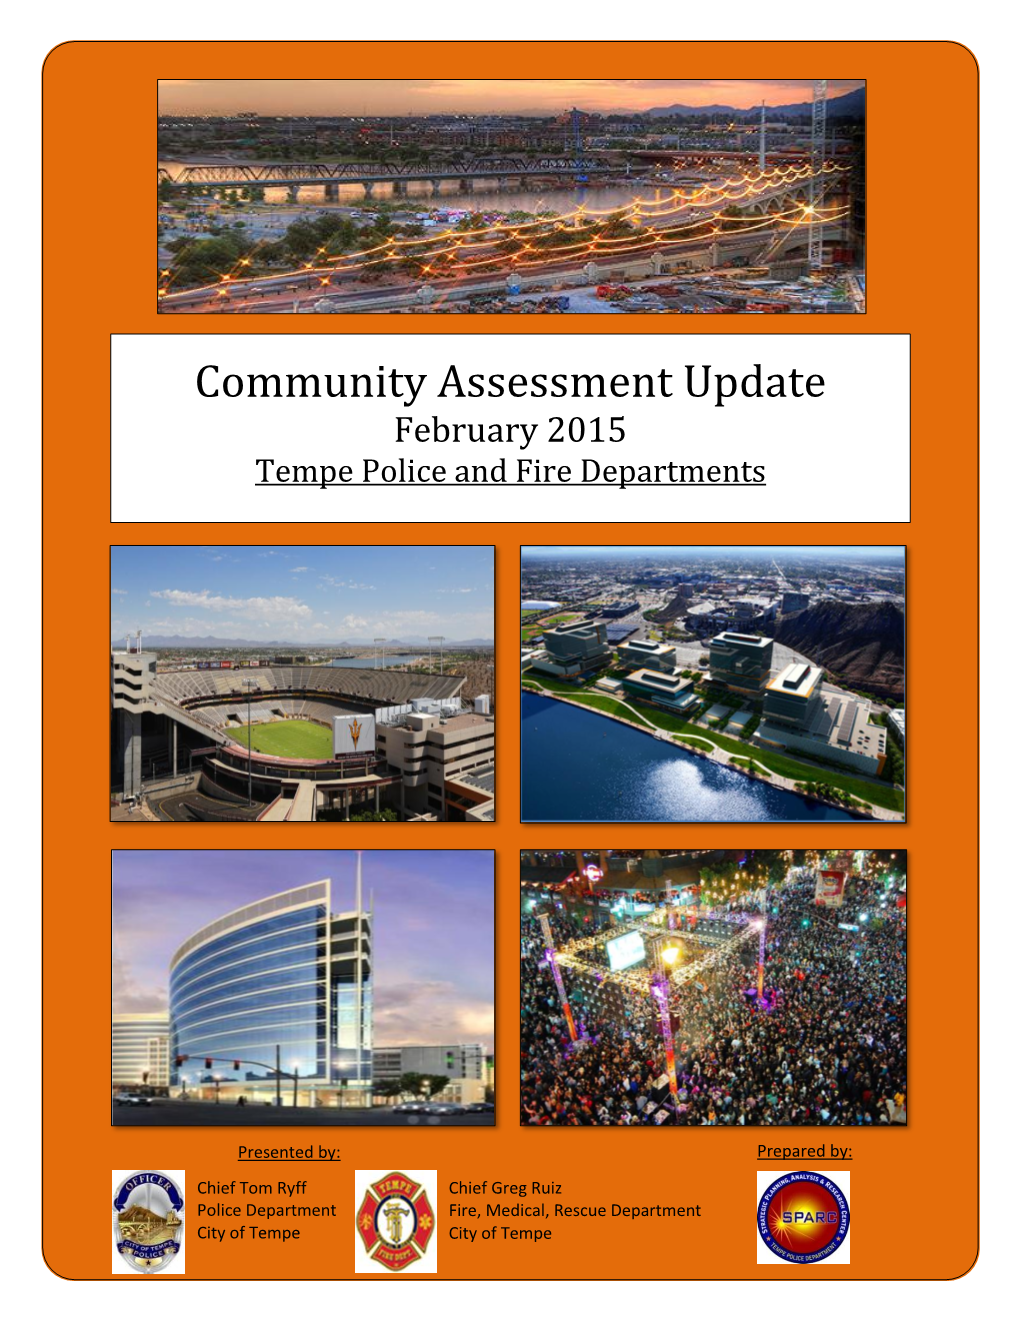 Community Assessment Update February 2015 Tempe Police and Fire Departments